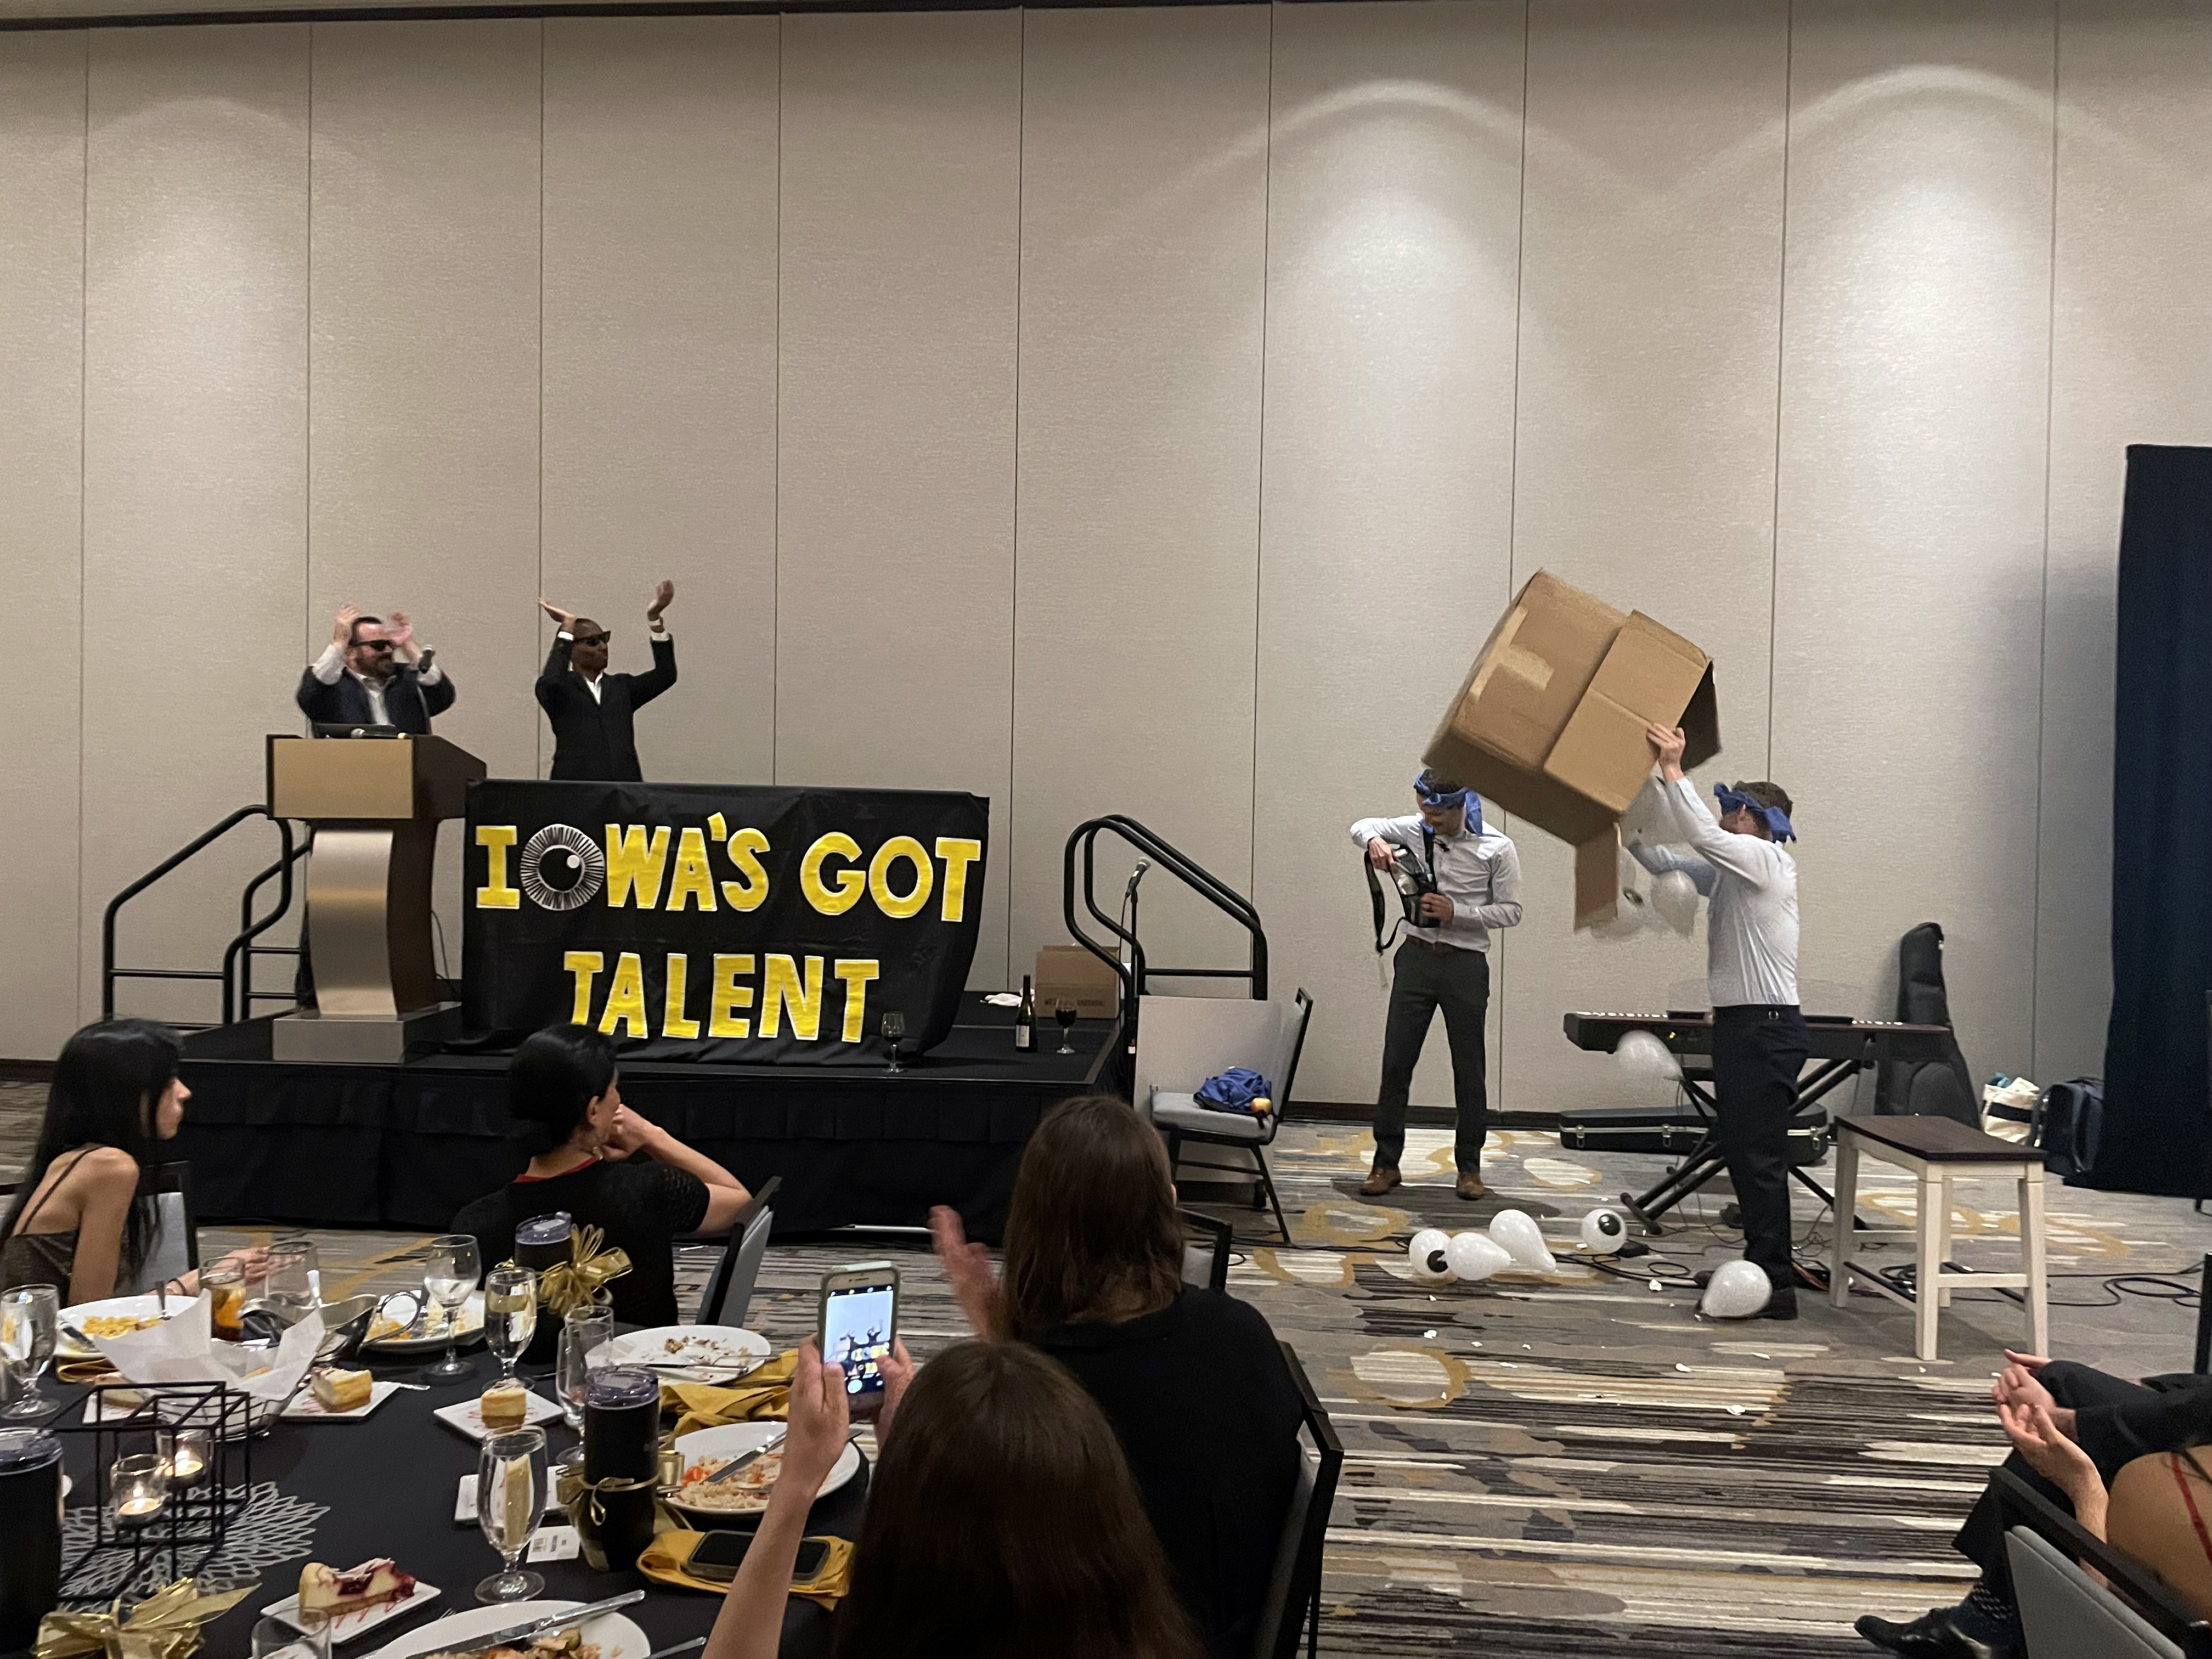 Residents Andrew Goldstein, Aaron Dotson, Sean Rodriguez, and Zachary Mortensen participate in "Iowa's Got Talent" at the Friday Banquet, Iowa Eye Annual Meeting and Alumni Reunion